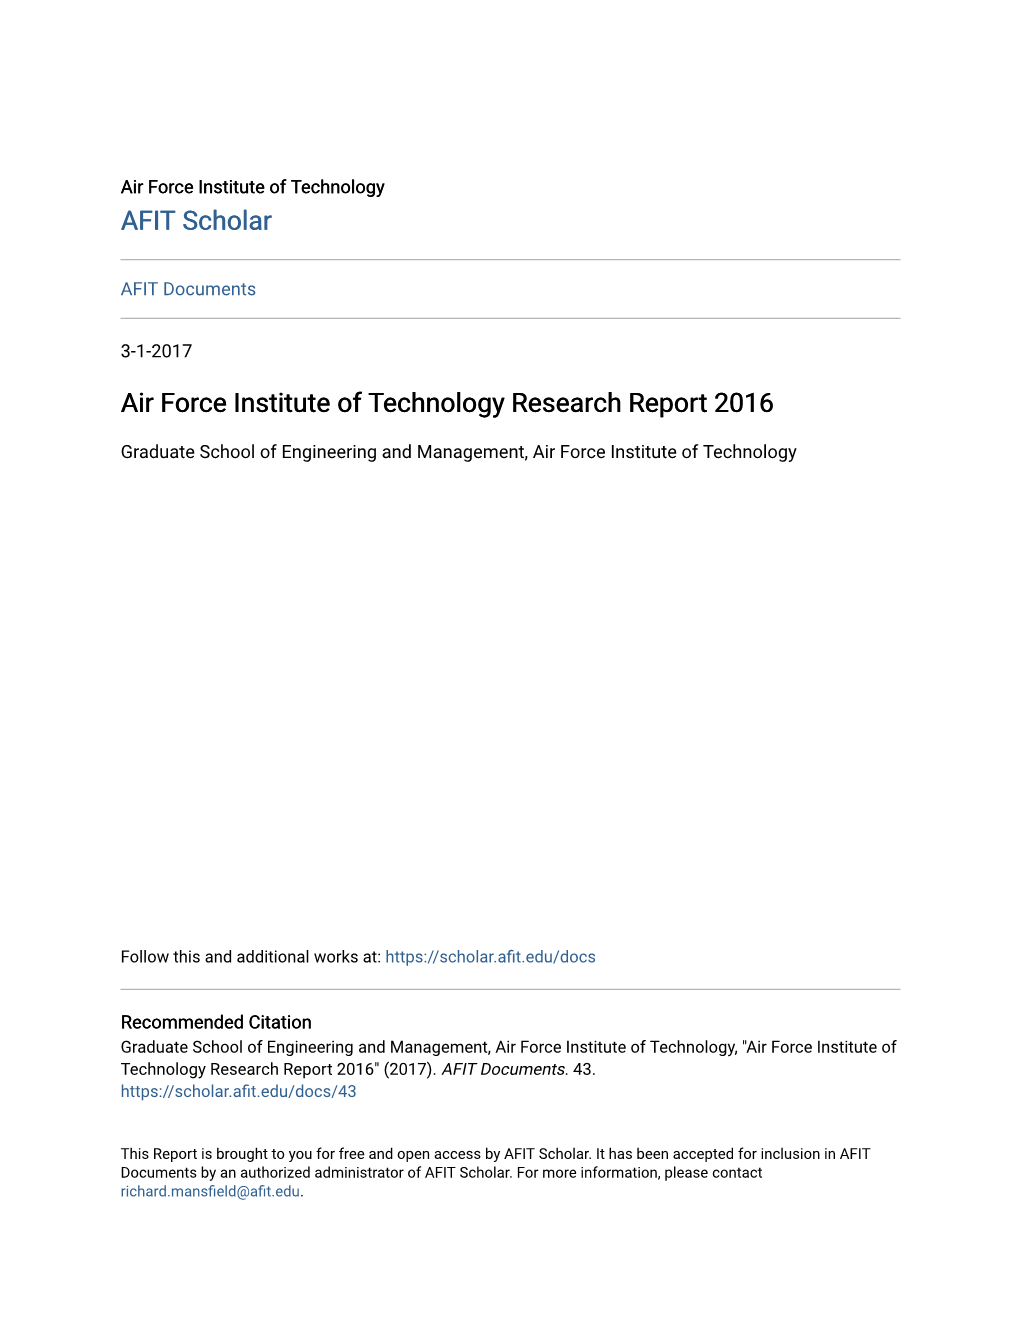 Air Force Institute of Technology Research Report 2016